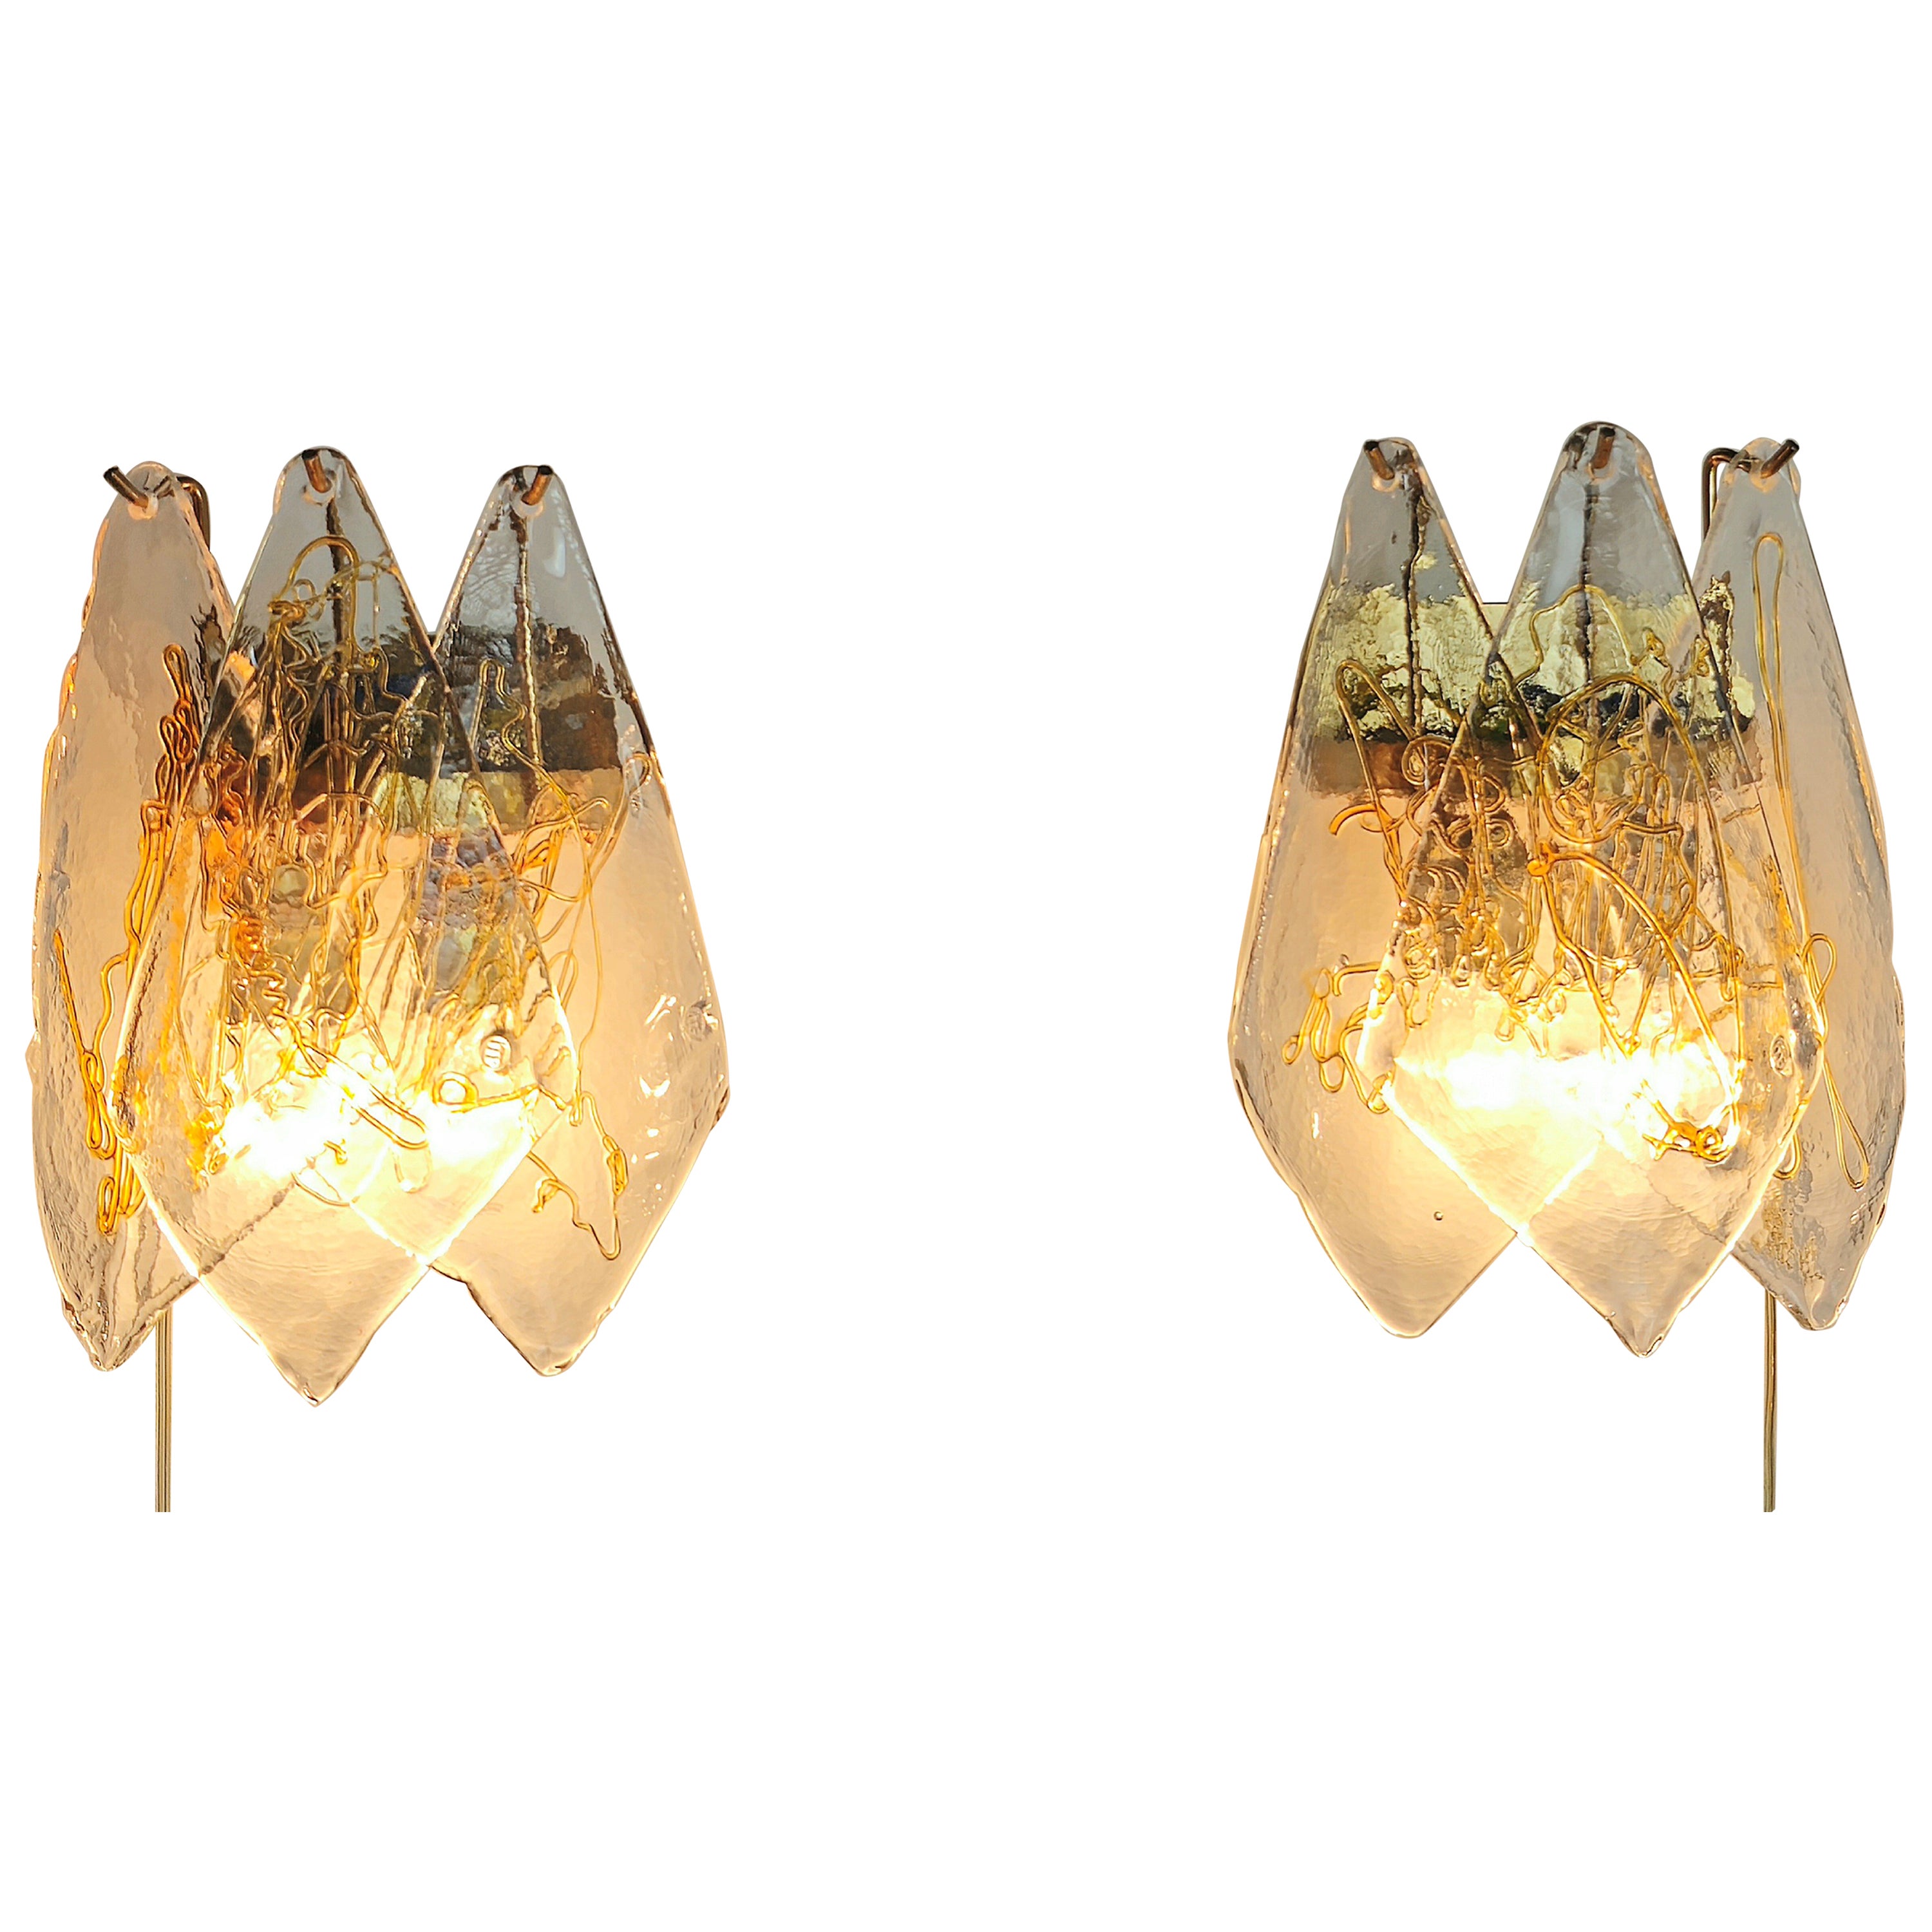 Set of 2 wall lamps produced in the 80s in Italy by La Murrina.
Each single lamp has a golden metal structure that supports 3 bat-shaped Murano glasses handcrafted with decorative gold-colored finishes, all with the original Murrina stamp.



Note: